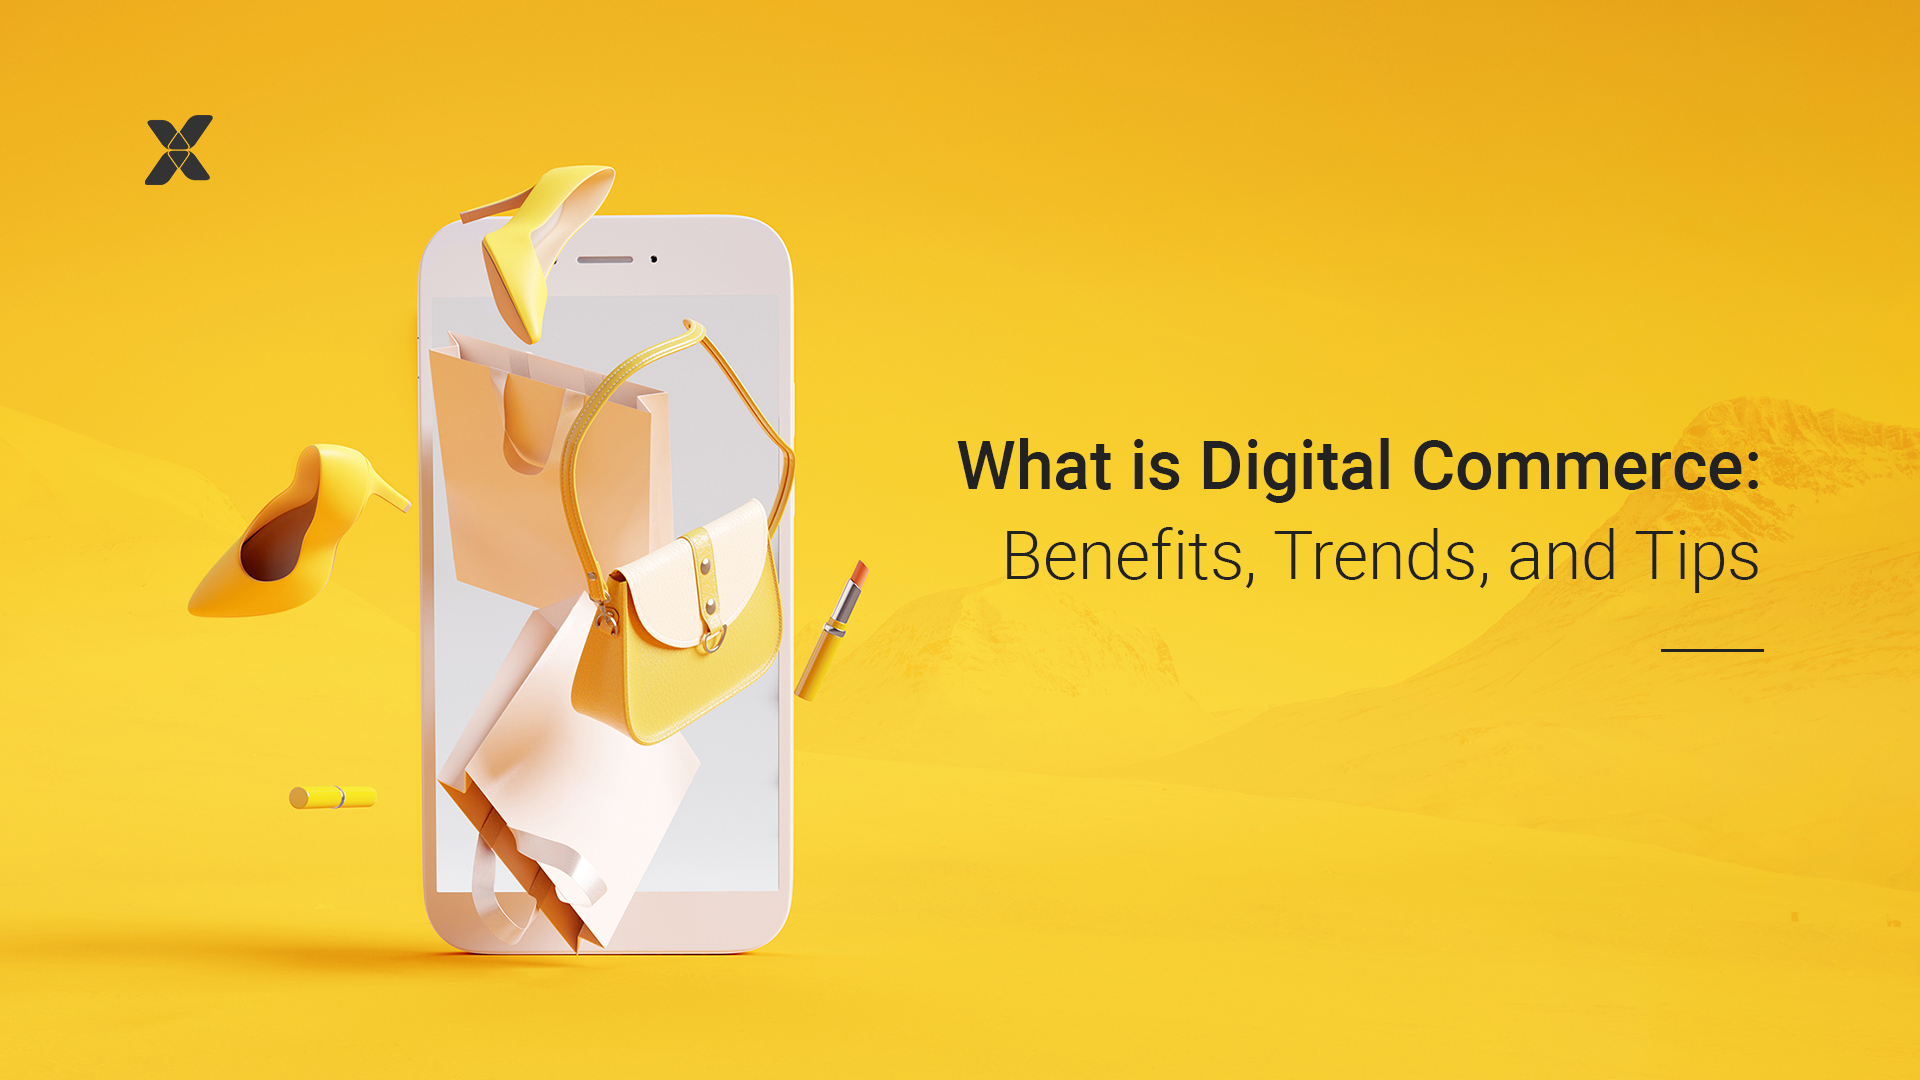 Abstract image by Vaimo with title "What is Digital Commerce: Benefits, Trends, and Tips."